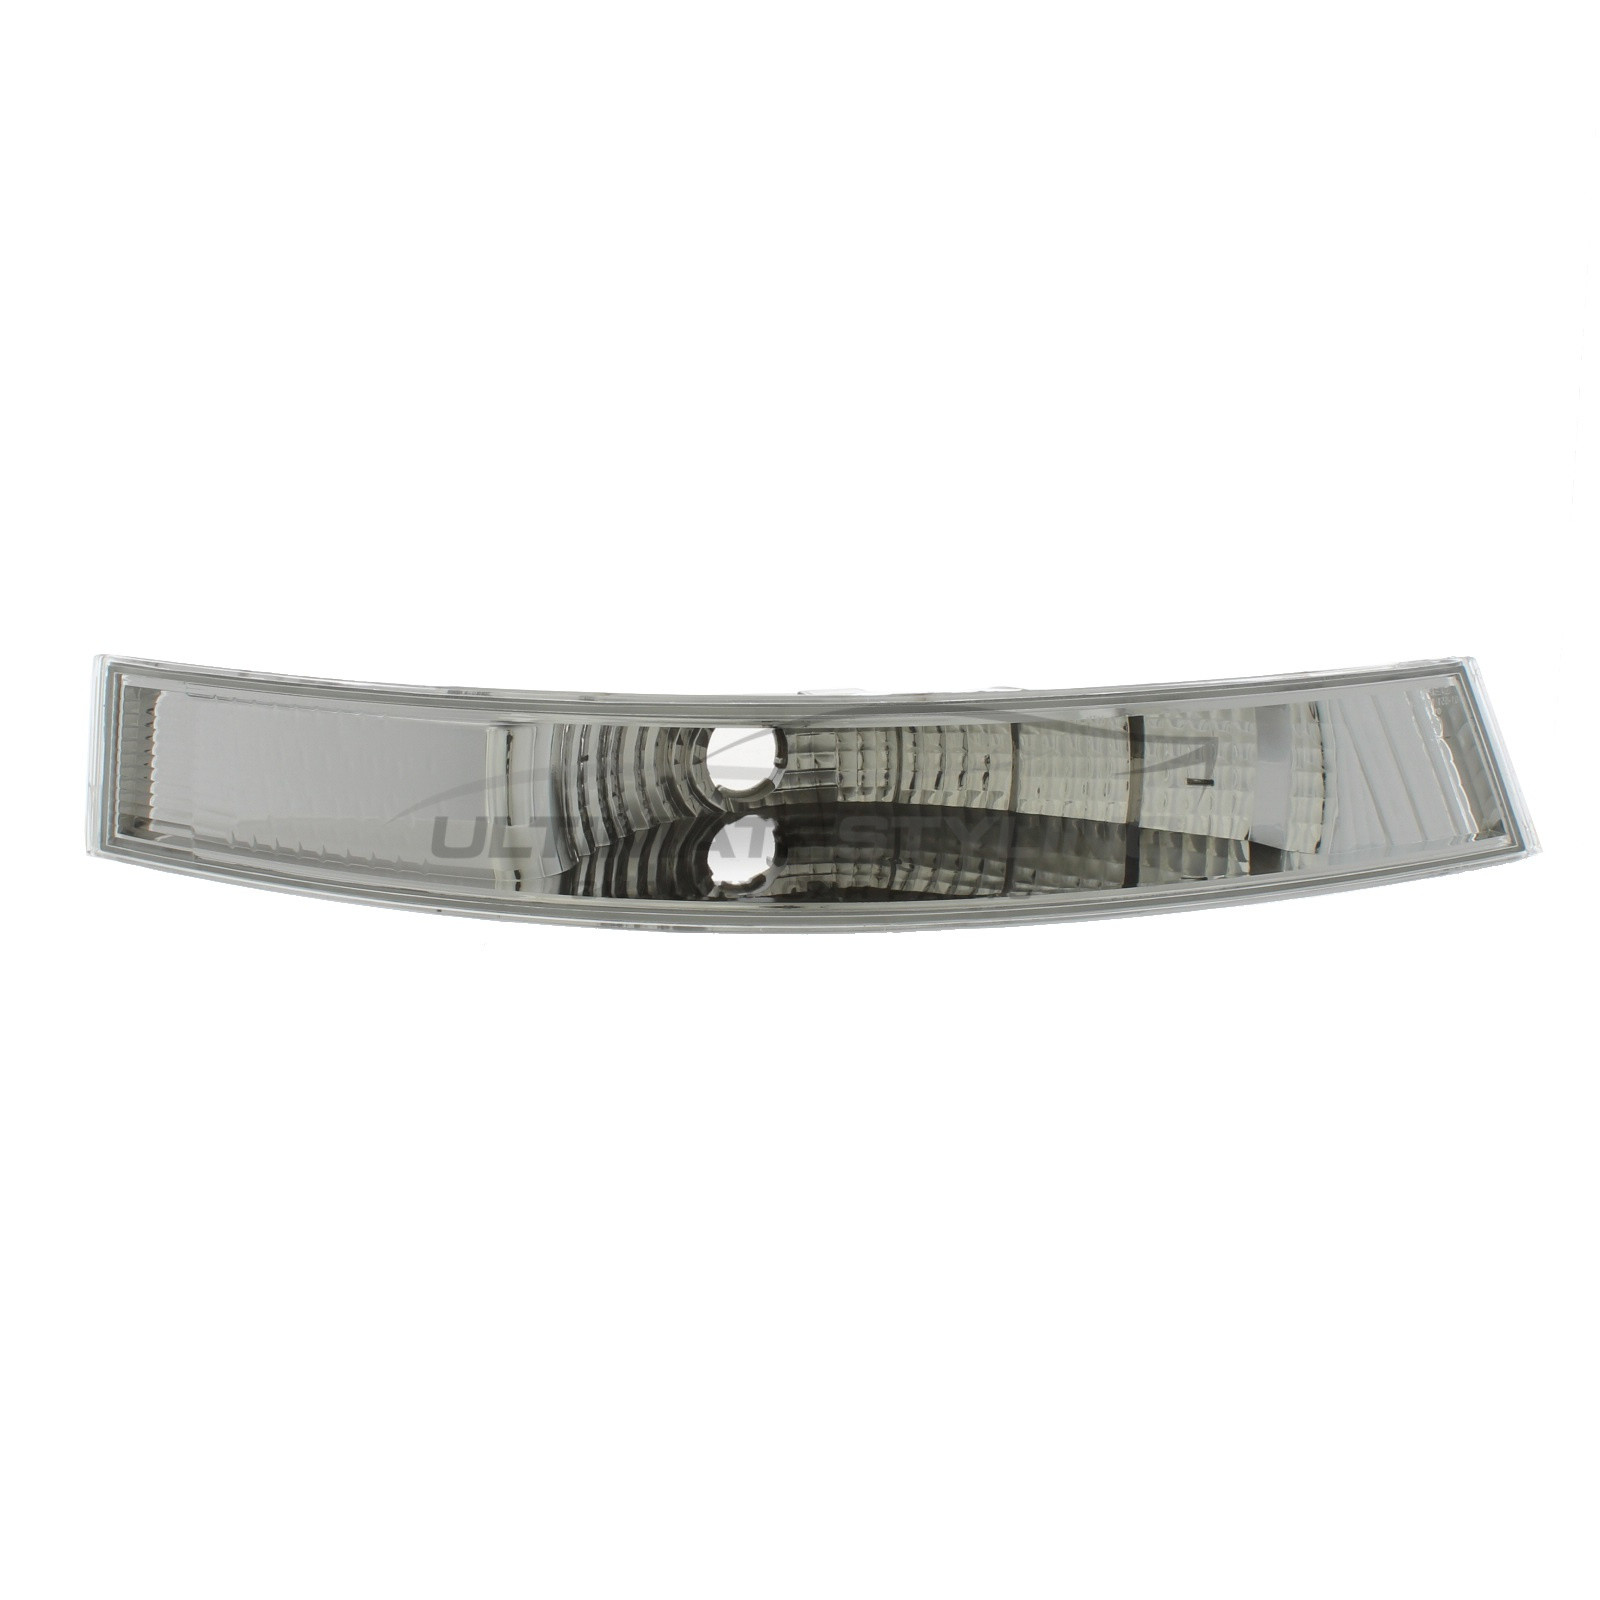 Nissan Interstar 2003-2011 / Renault Master 2003-2010 Clear Front Indicator Excludes Bulb Holder - Drivers Side (RH)